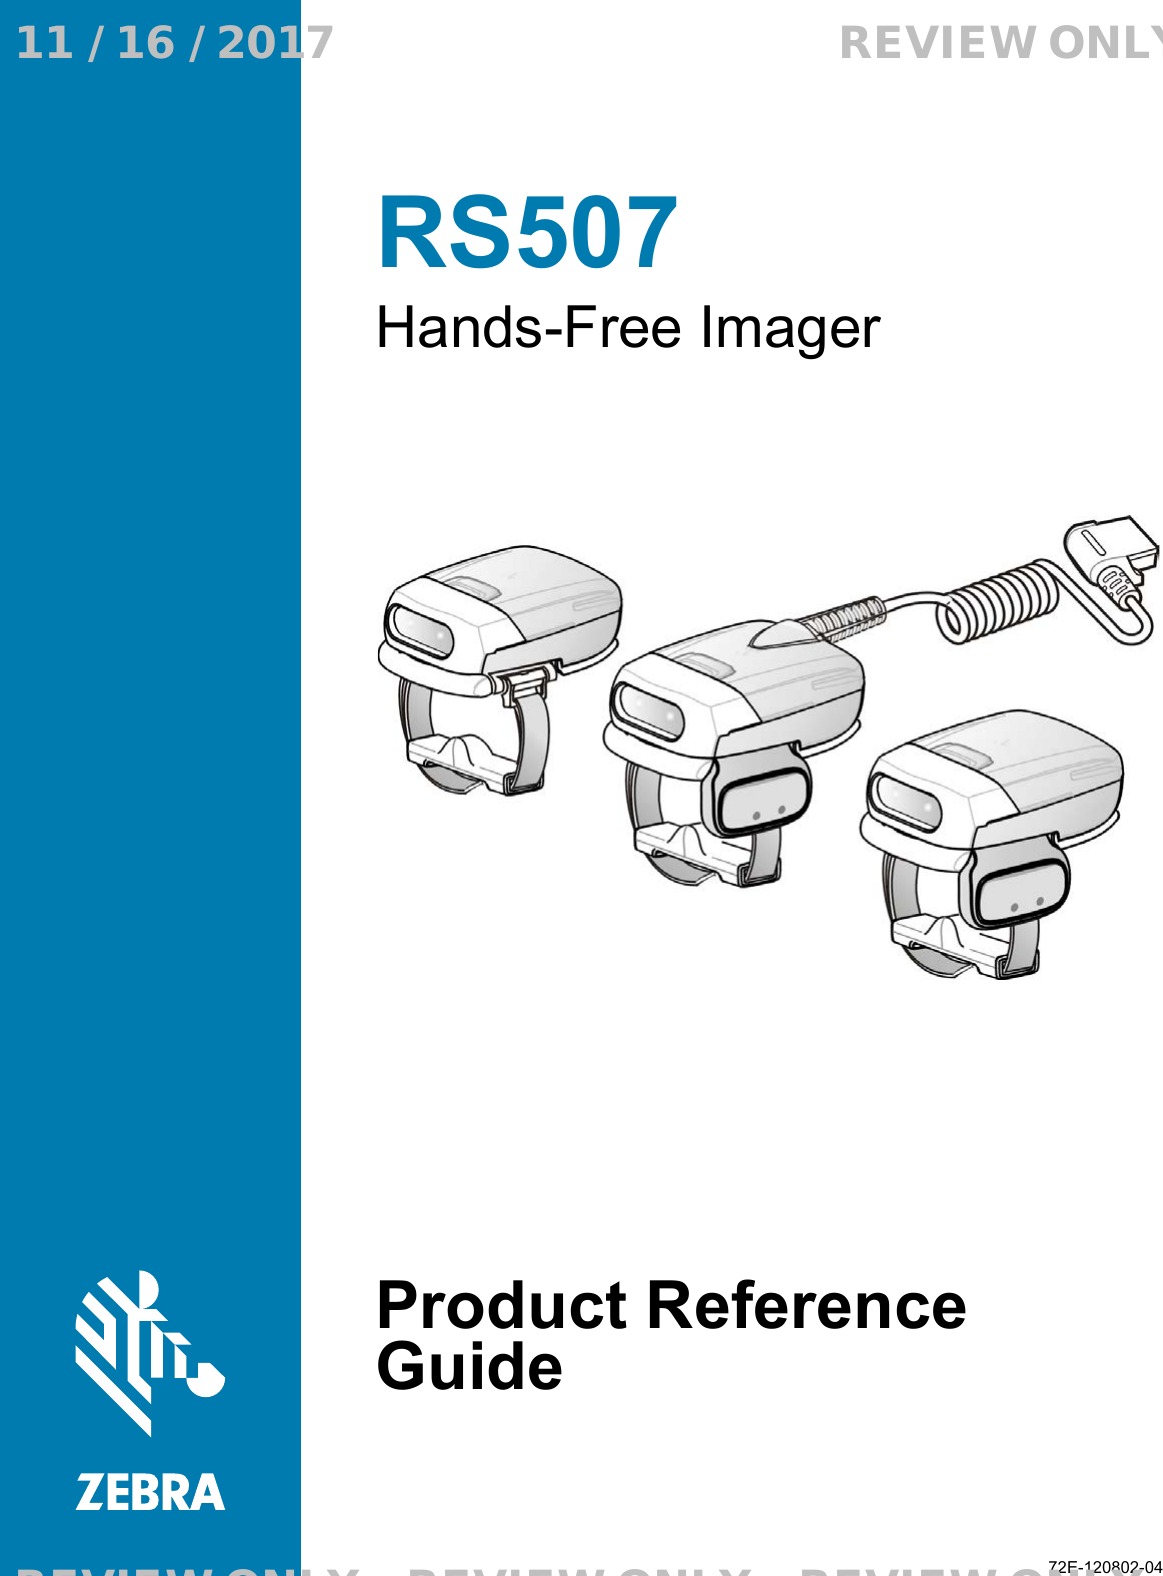 Hands-Free ImagerRS50772E-120802-04Product Reference Guide 11 / 16 / 2017                                  REVIEW ONLY                             REVIEW ONLY - REVIEW ONLY - REVIEW ONLY